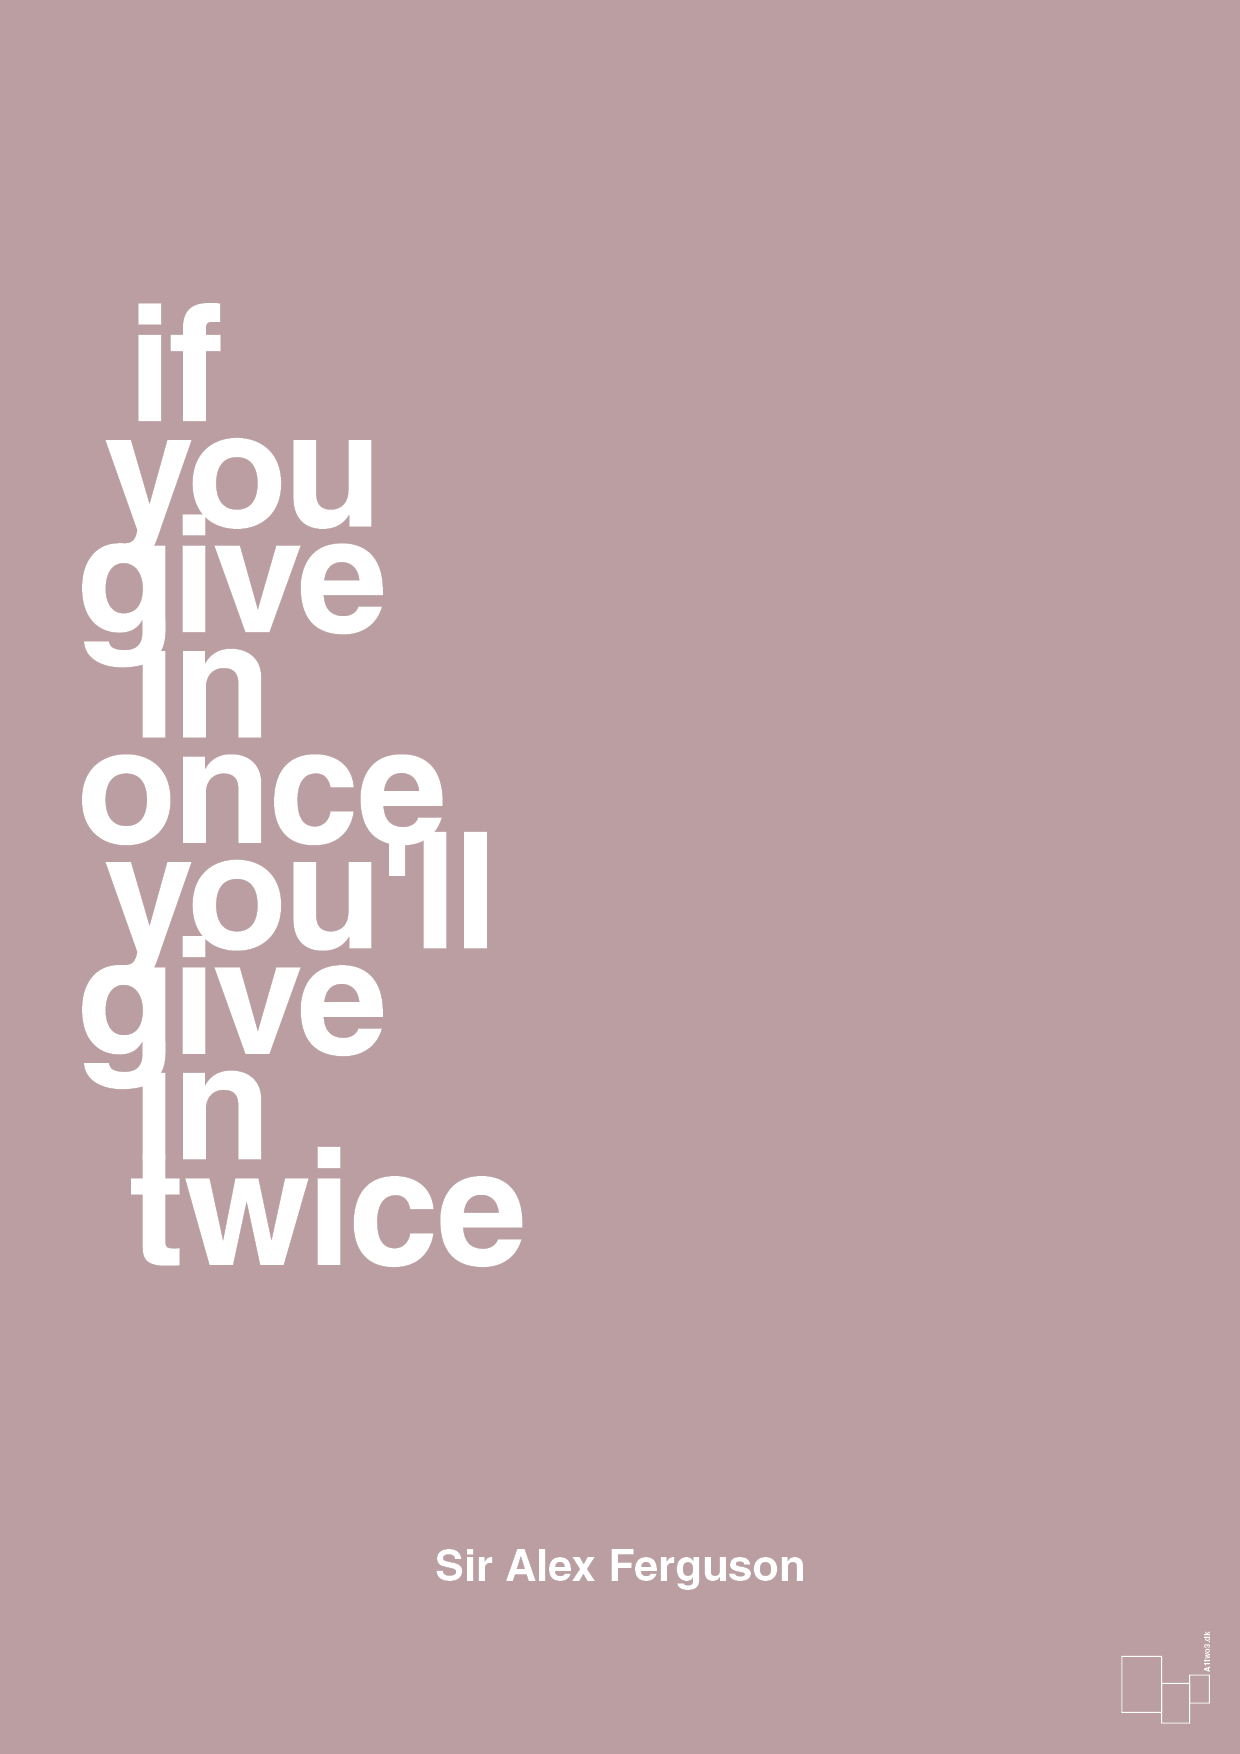 if you give in once you'll give in twice - Plakat med Citater i Light Rose